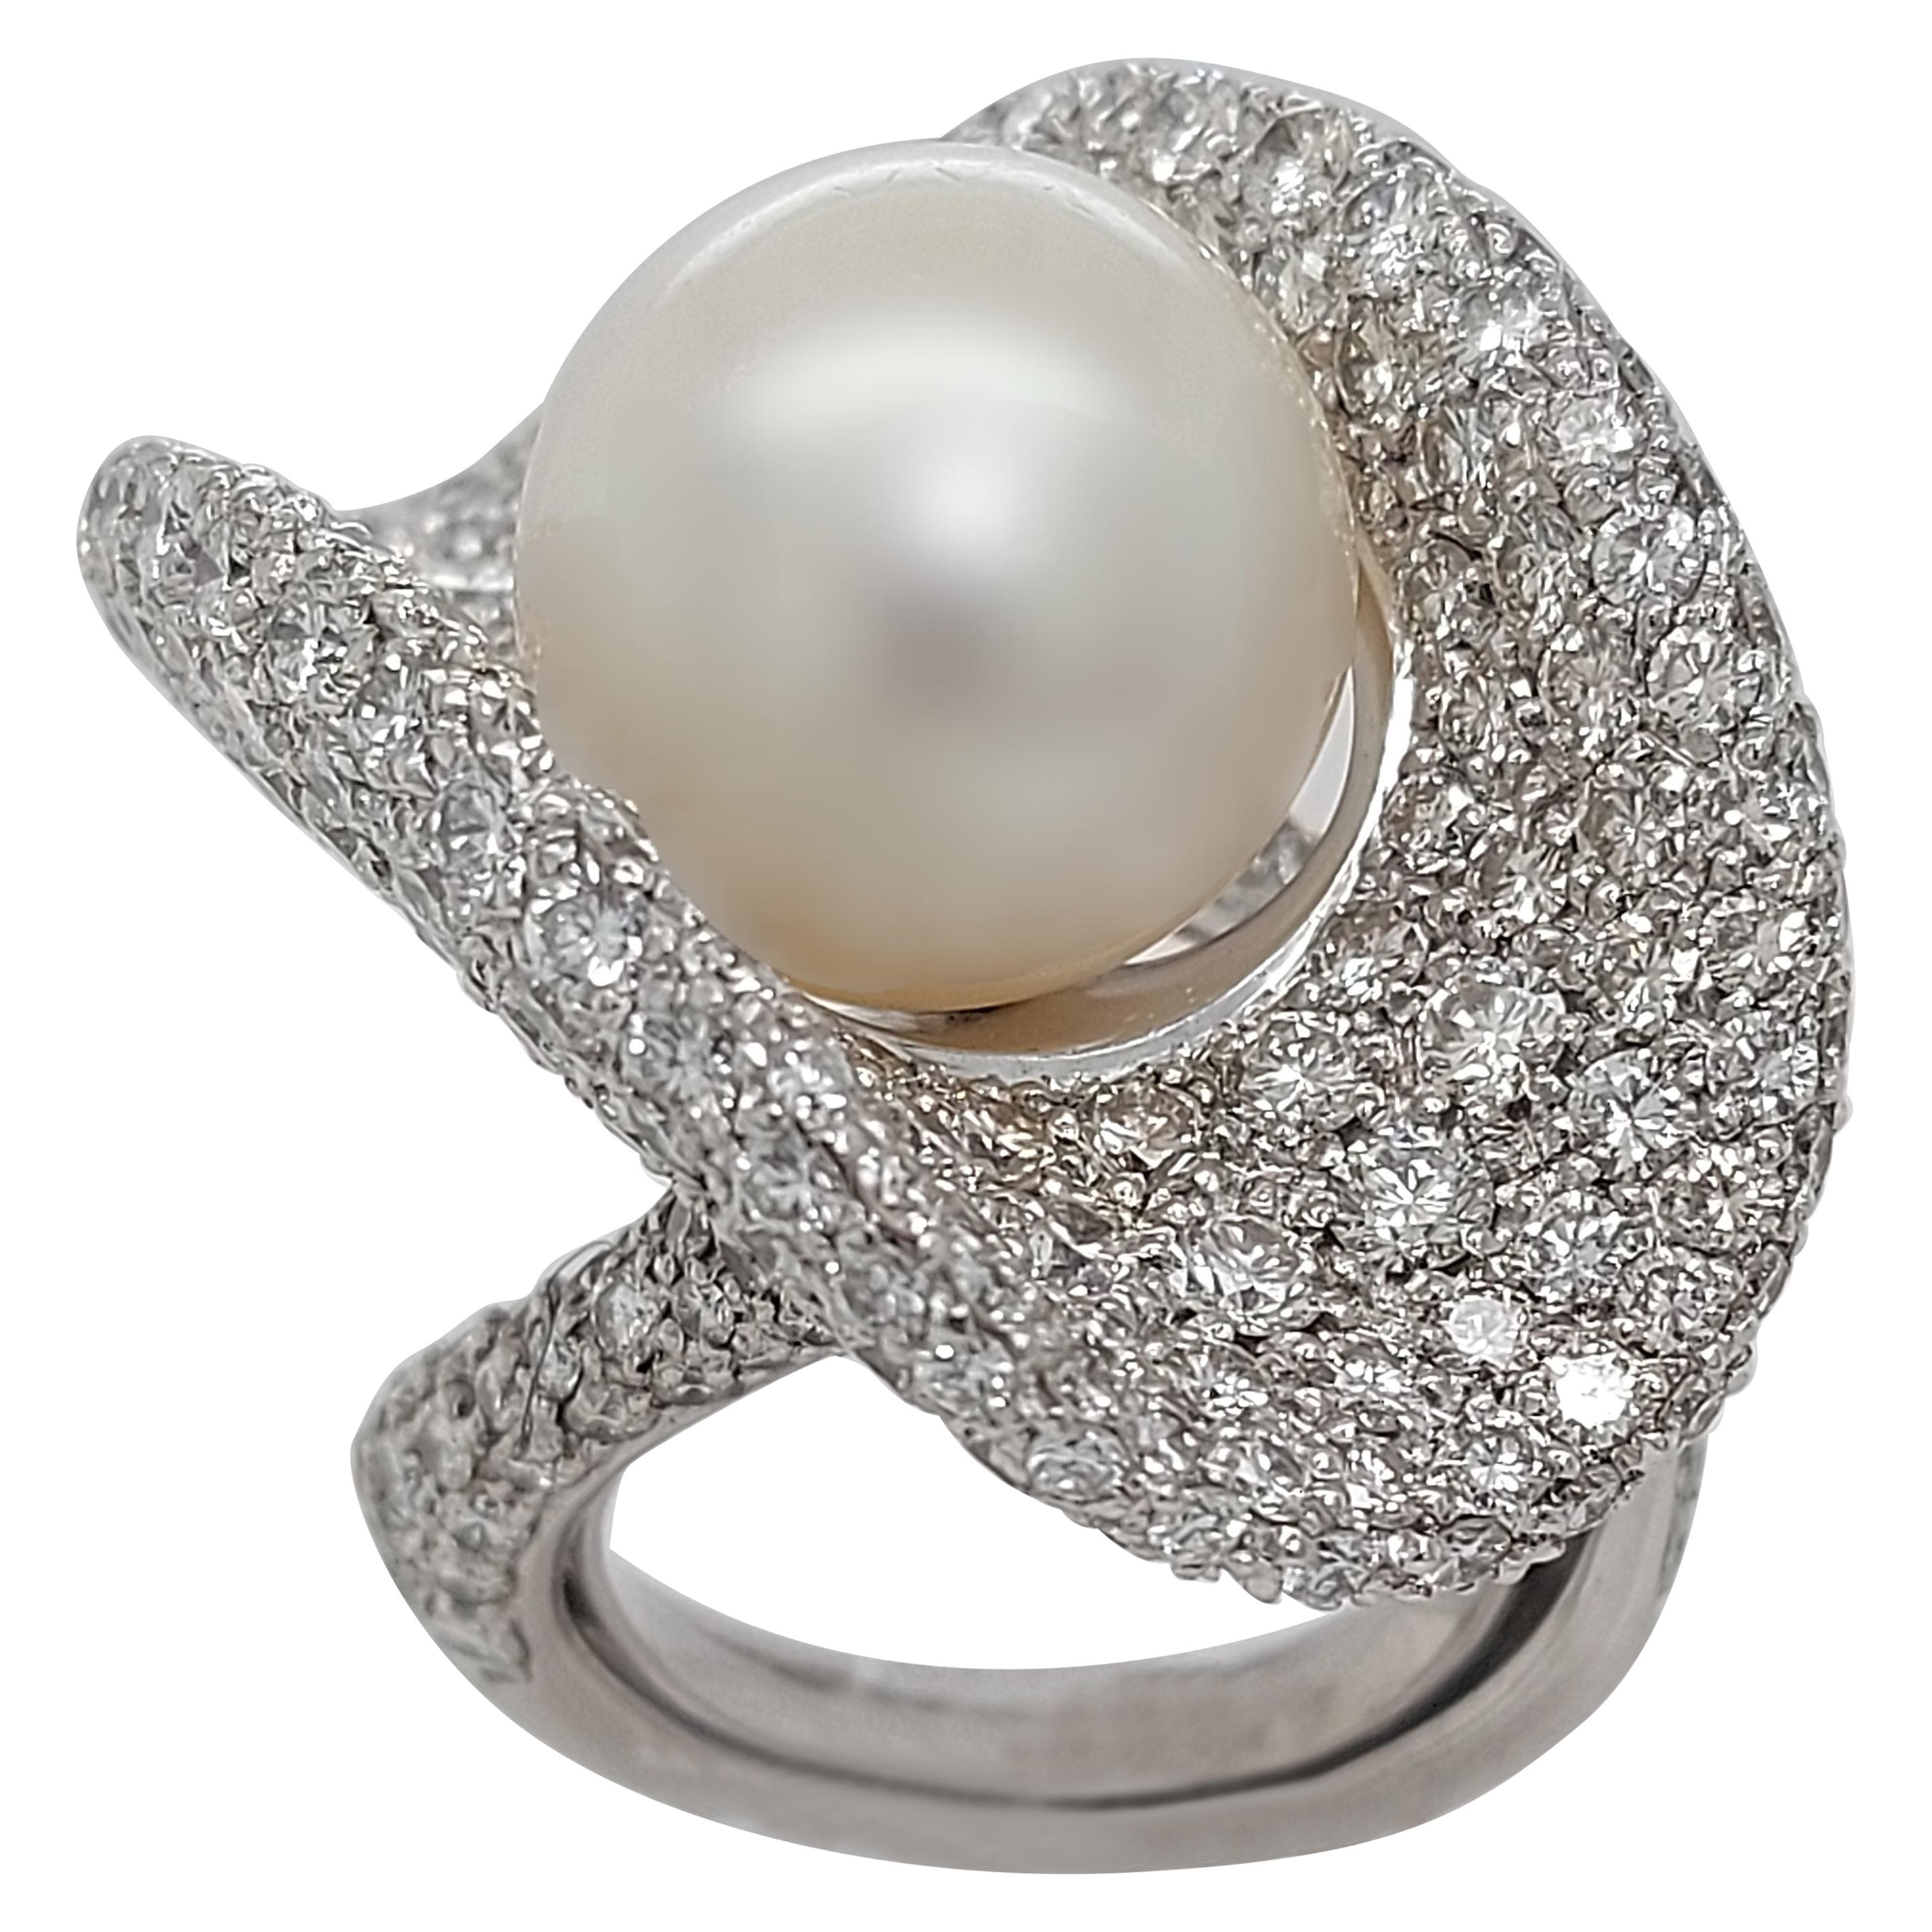 Magnificent 18 Karat White Gold Ring with 14.5 Carat Diamonds and a Big Pearl